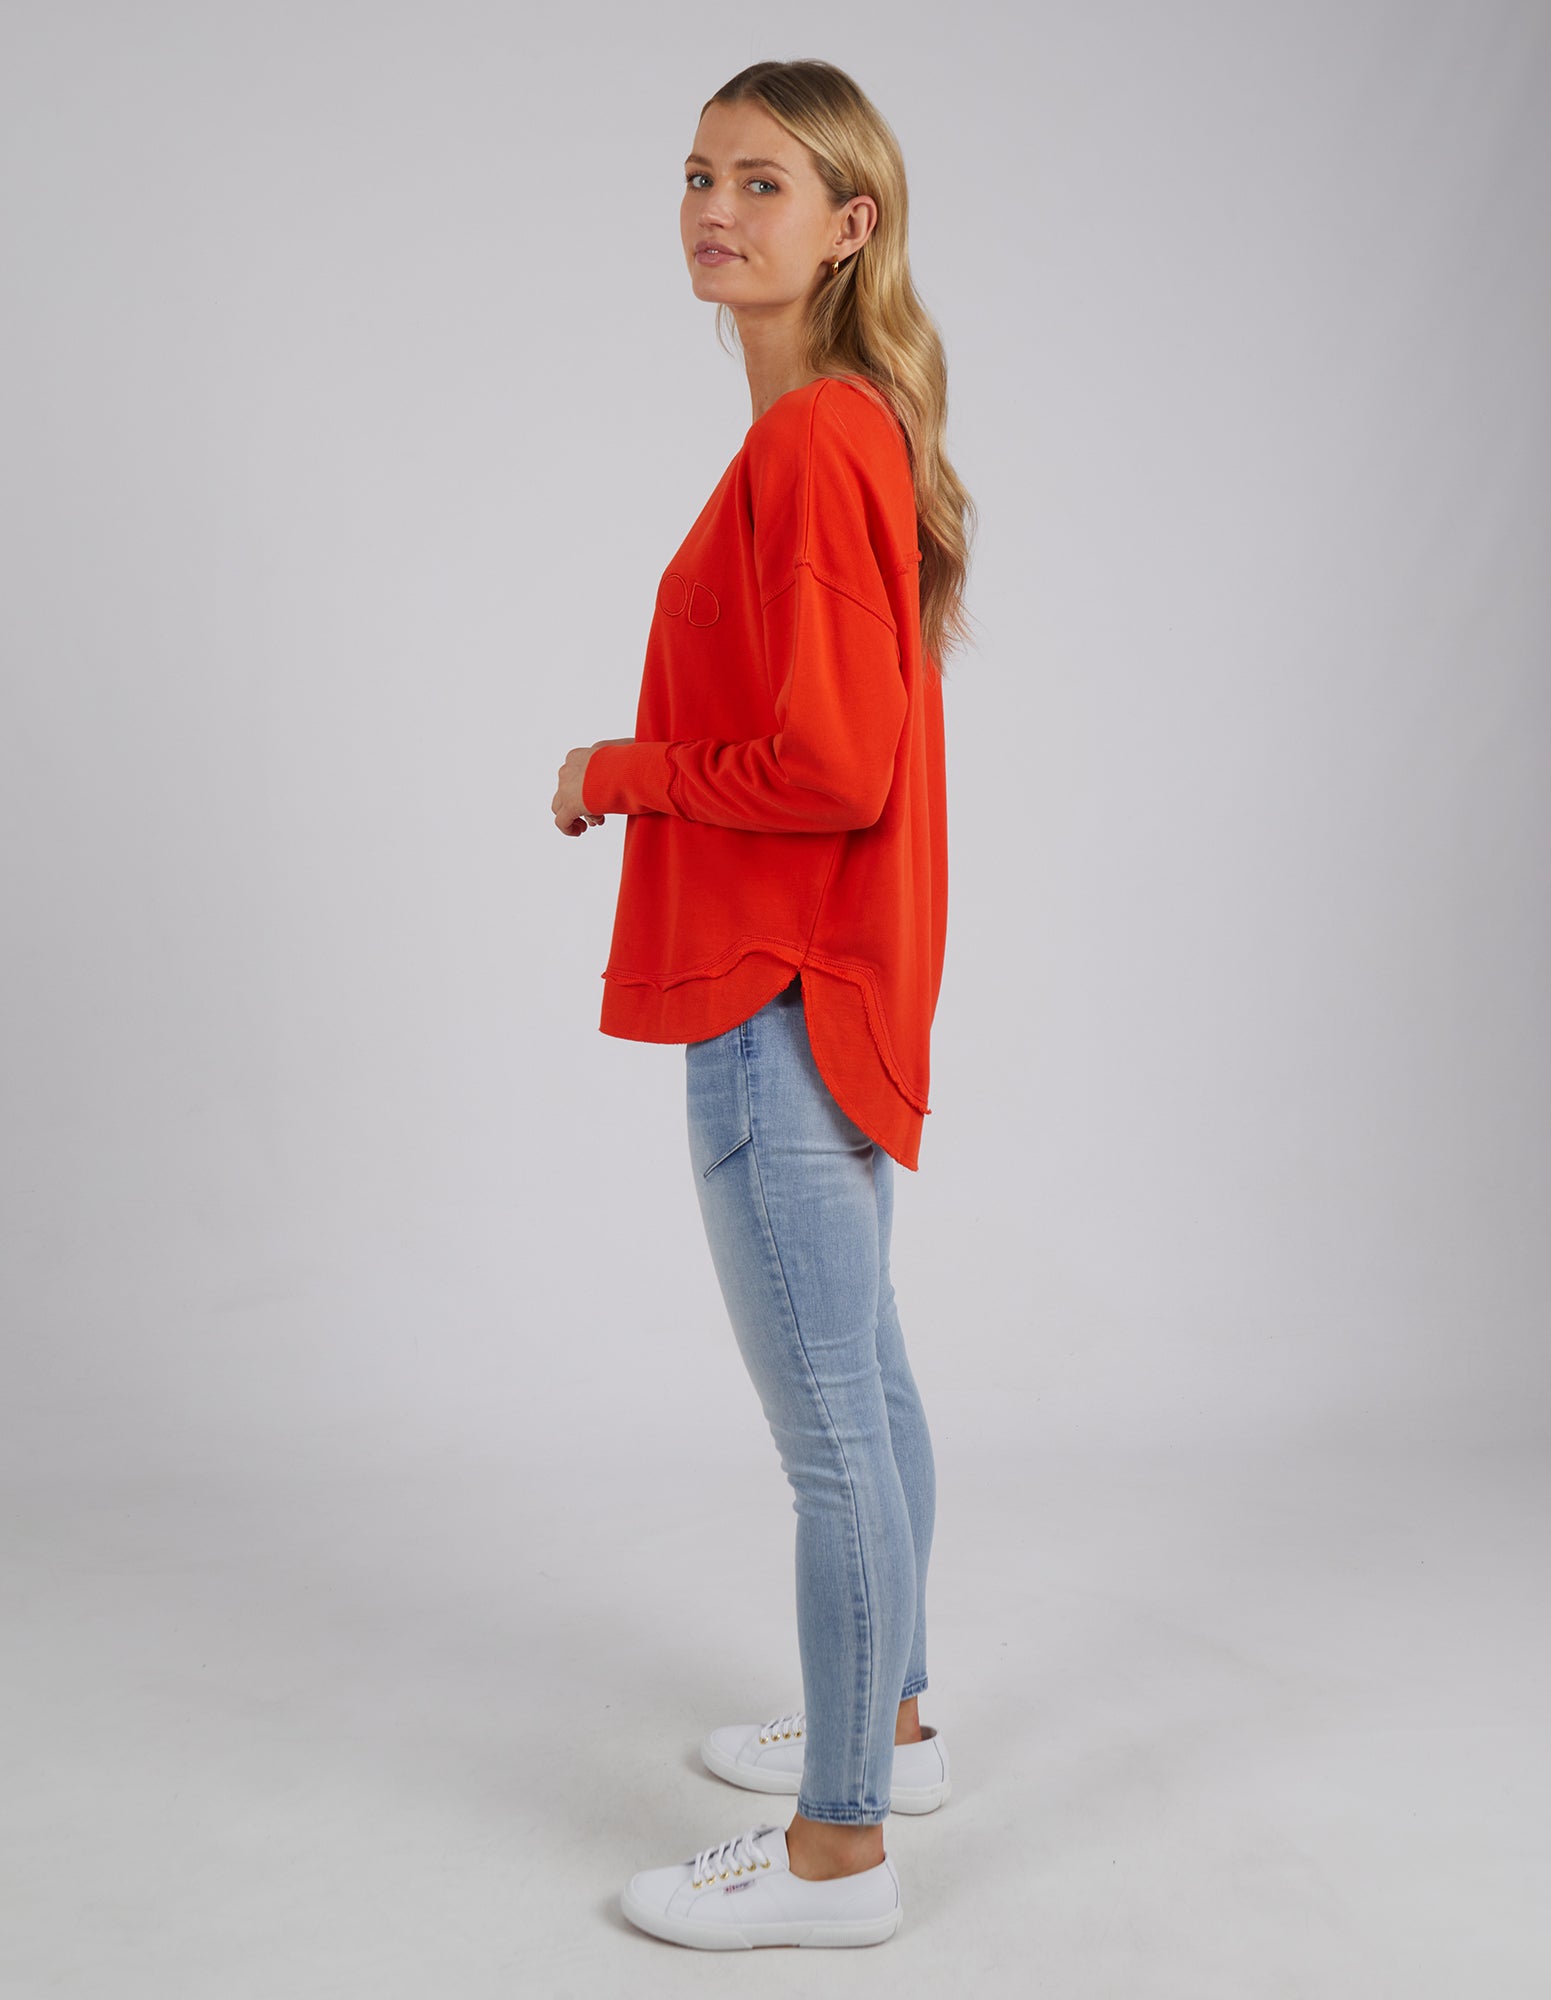 FOXWOOD SIMPLIFIED CREW - BRIGHT RED - THE VOGUE STORE